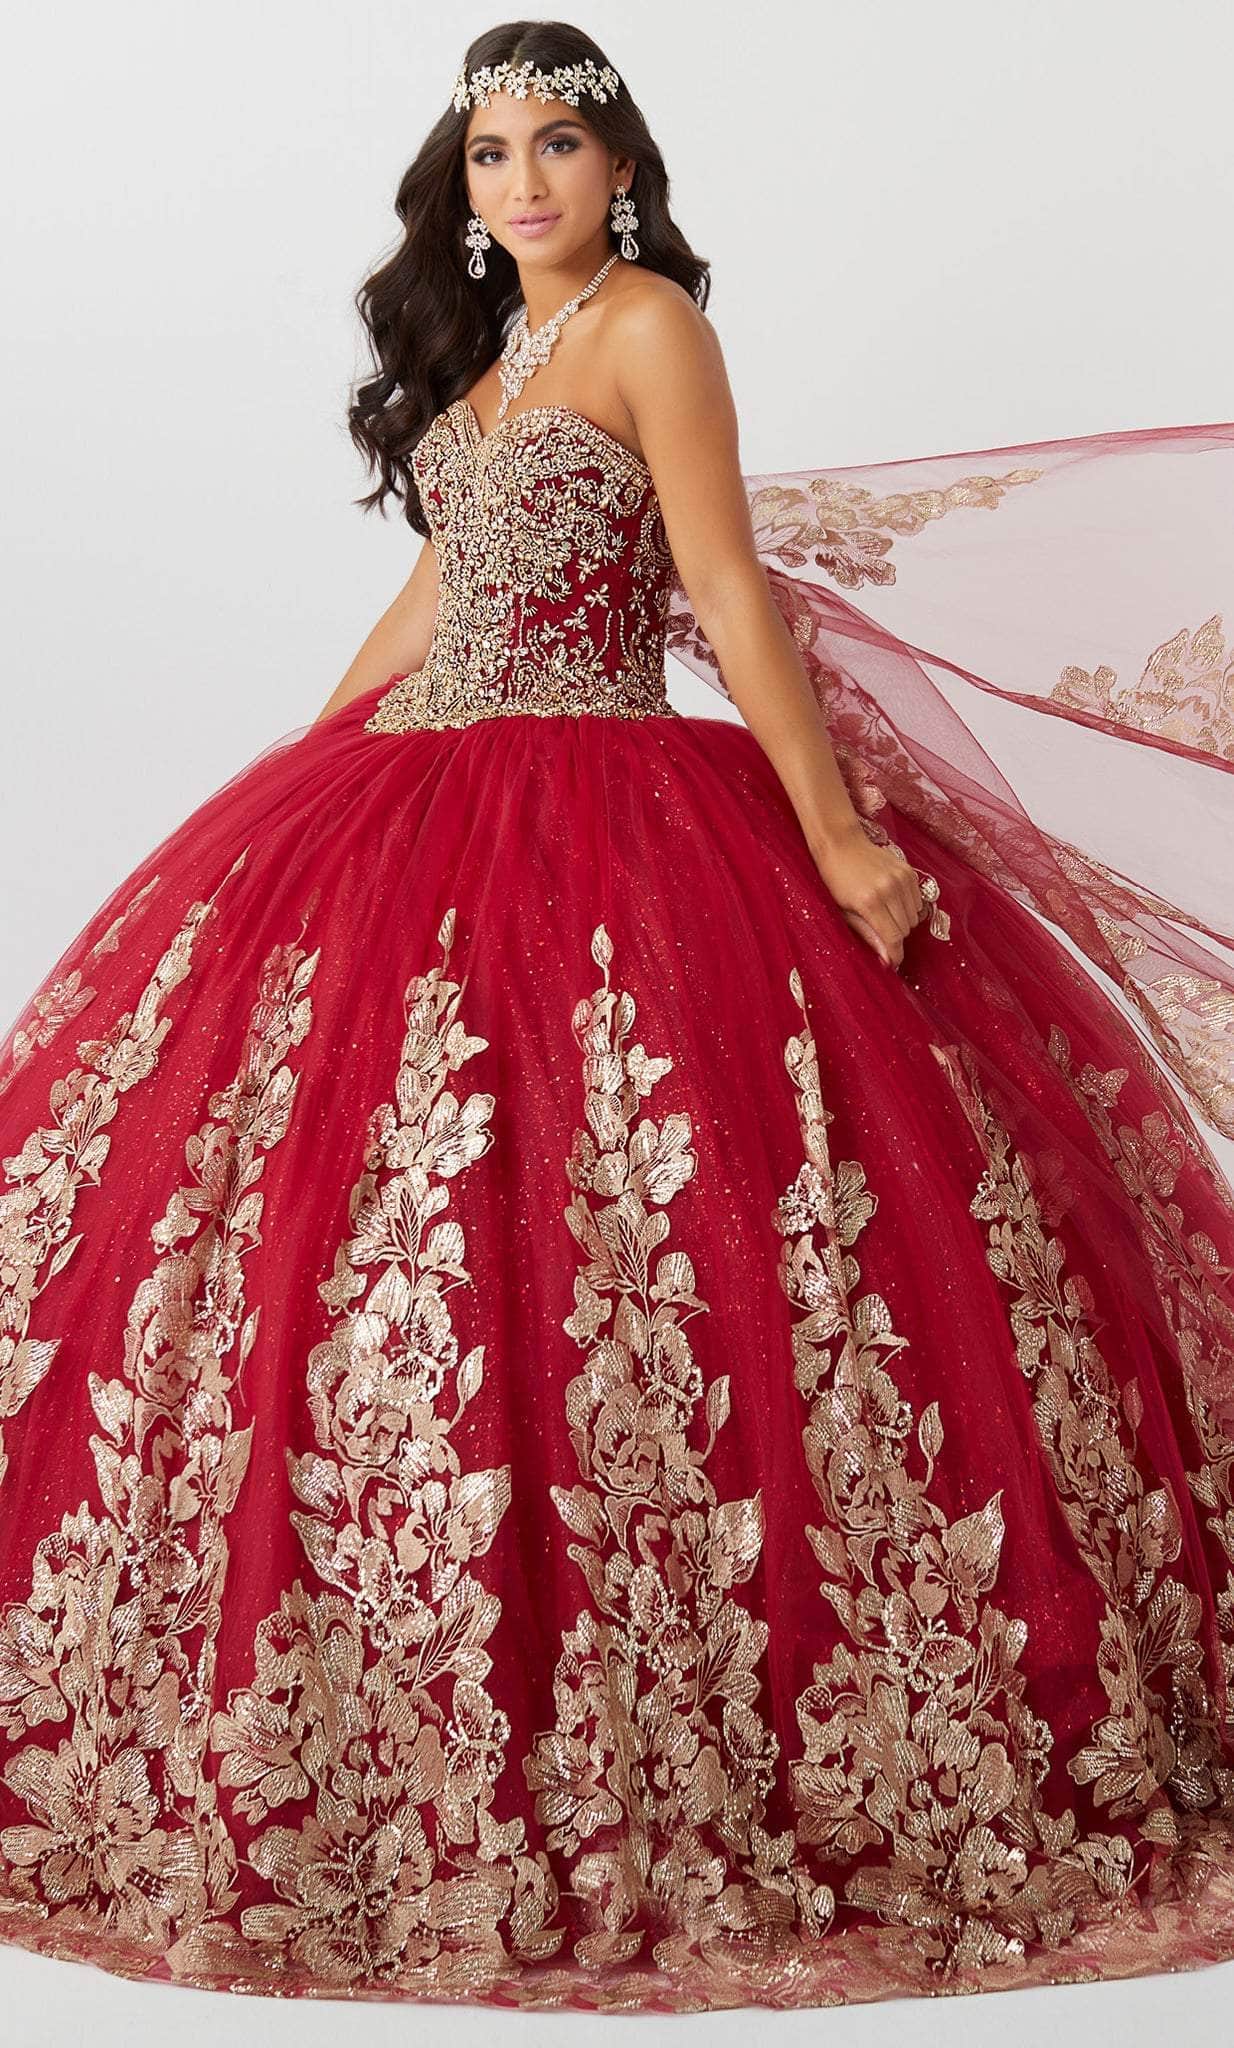 Image of Fiesta Gowns 56468 - Strapless Highly Embellished Gown